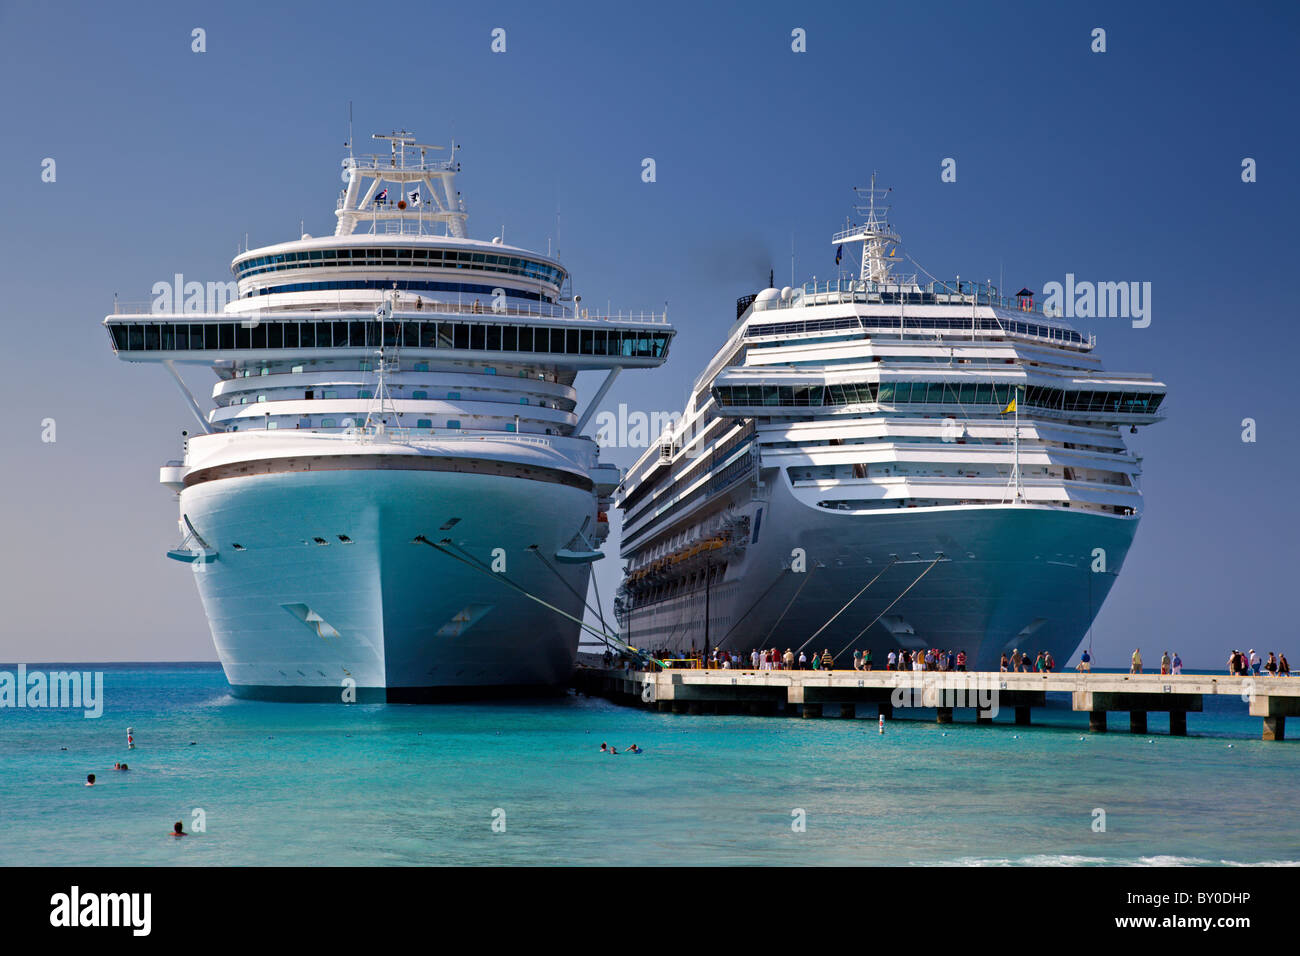 Two Cruise Ships Docked in Grand Turk Island Stock Photo